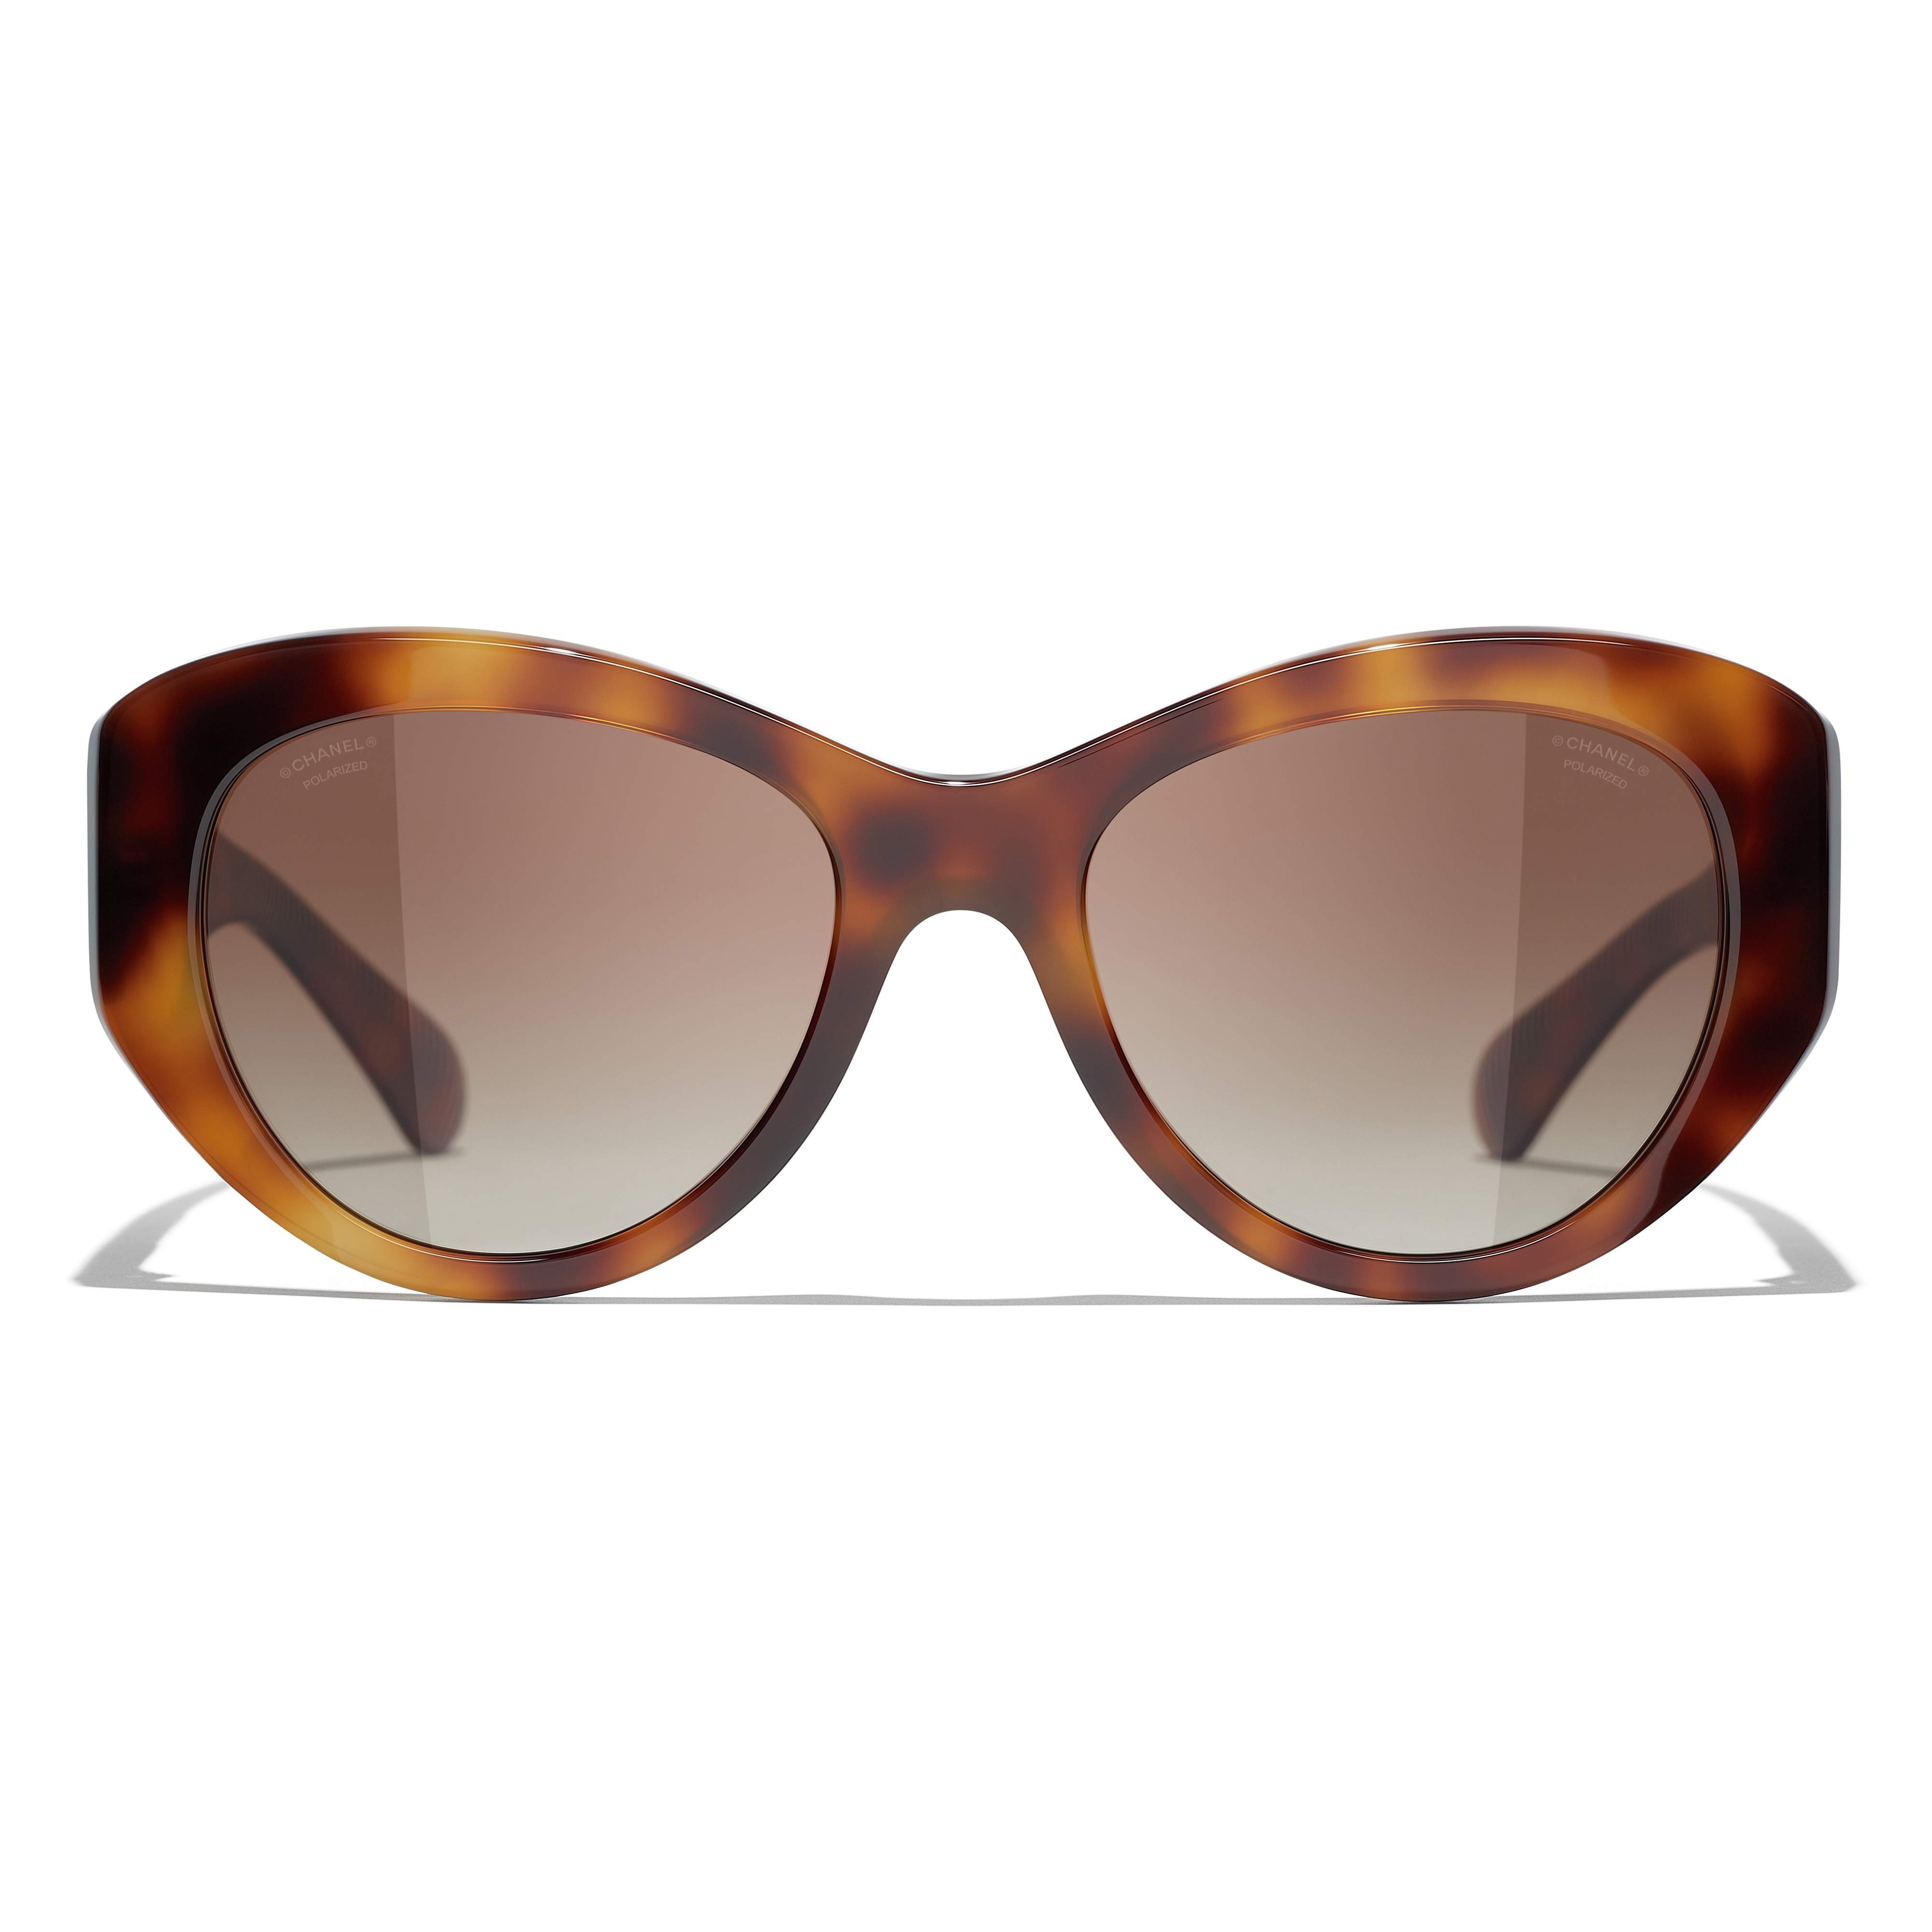 CHANEL Acetate Butterfly Sunglasses 5371 Tortoise 546694